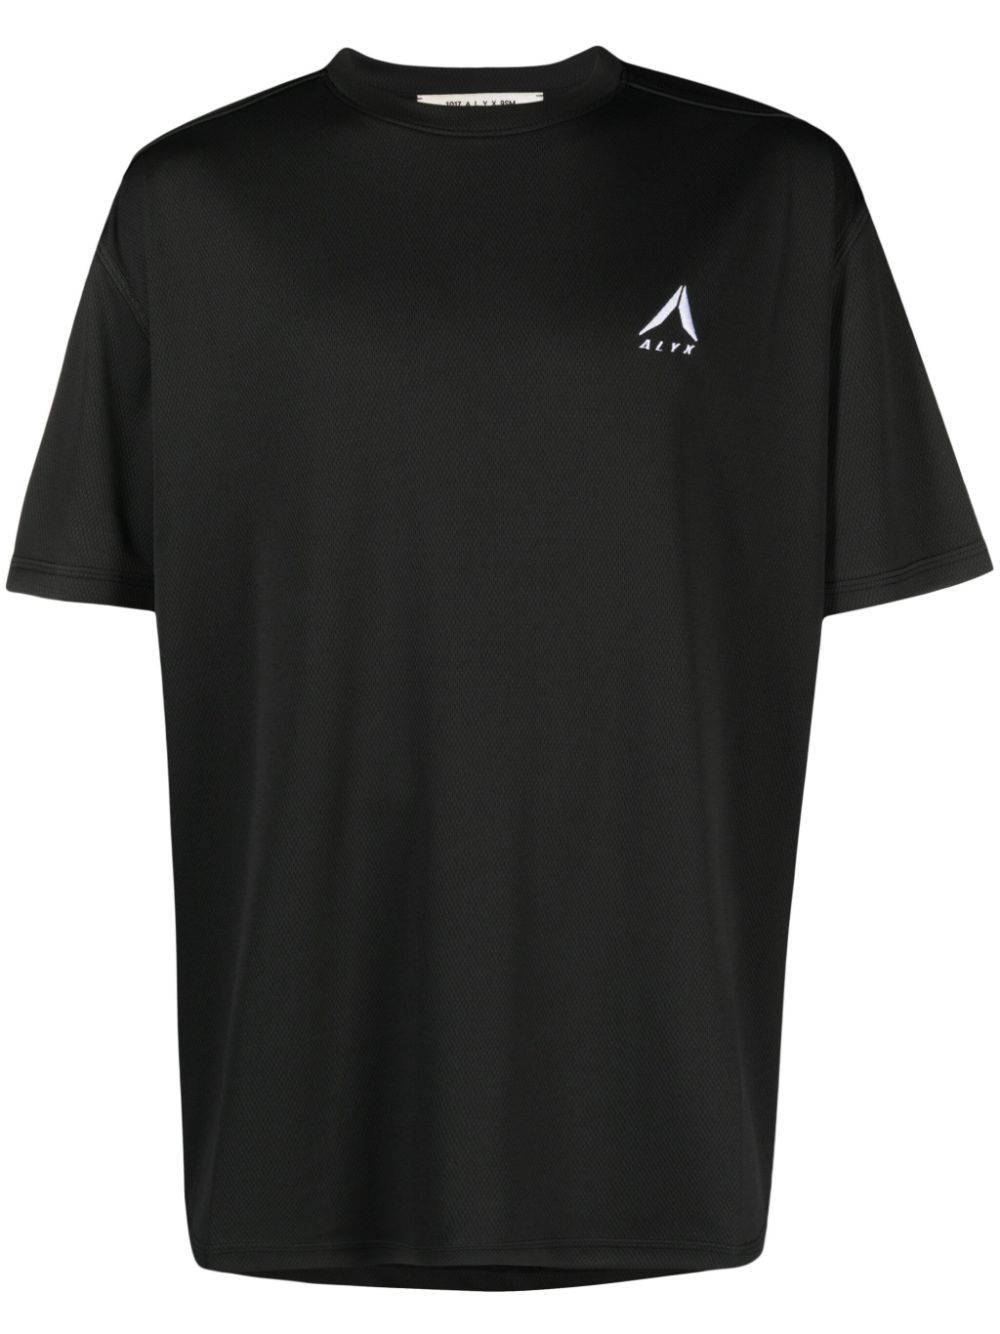 1017 ALYX 9SM 남성 logo-embroidered mesh T-shirt - Black AAMTS0415FA02